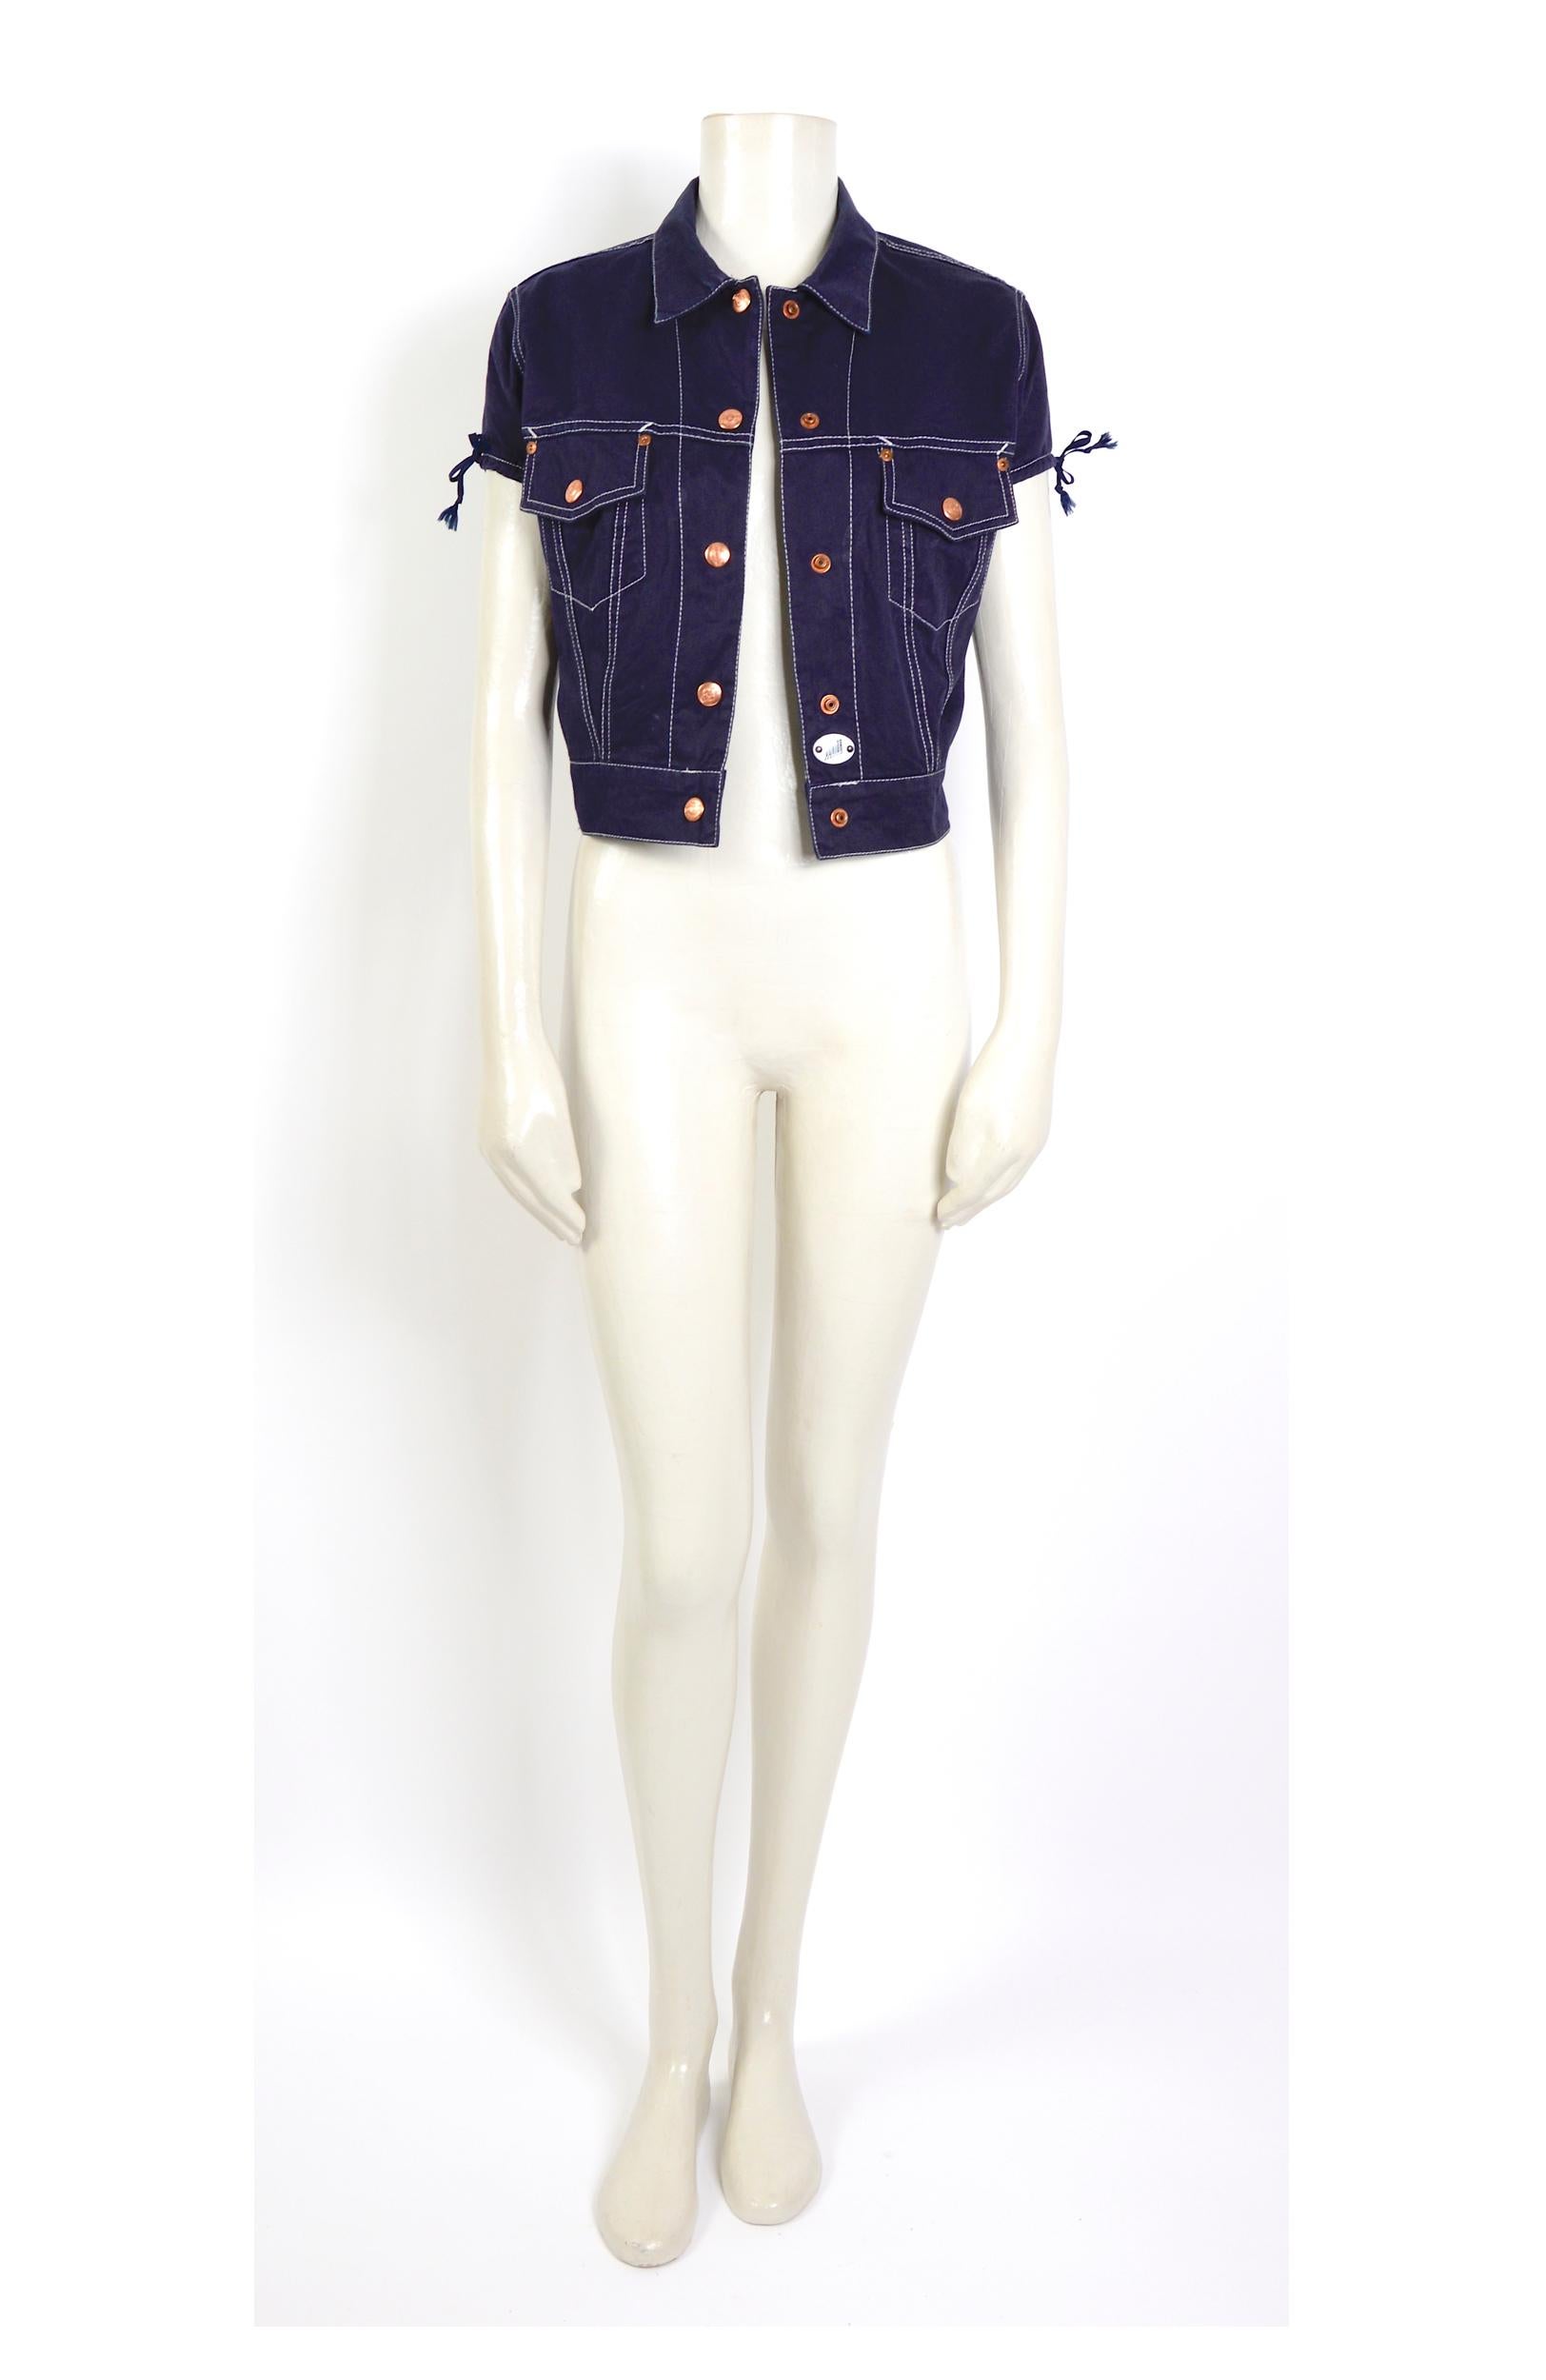 Jean-Paul Gaultier junior 100% cotton jeans short sleeves jacket 
Made in Italy - Size 42 
The jacket goes with the bermuda shorts we have listed, separately, unfortunately, the jacket was worn and washed less making the color a touch darker than